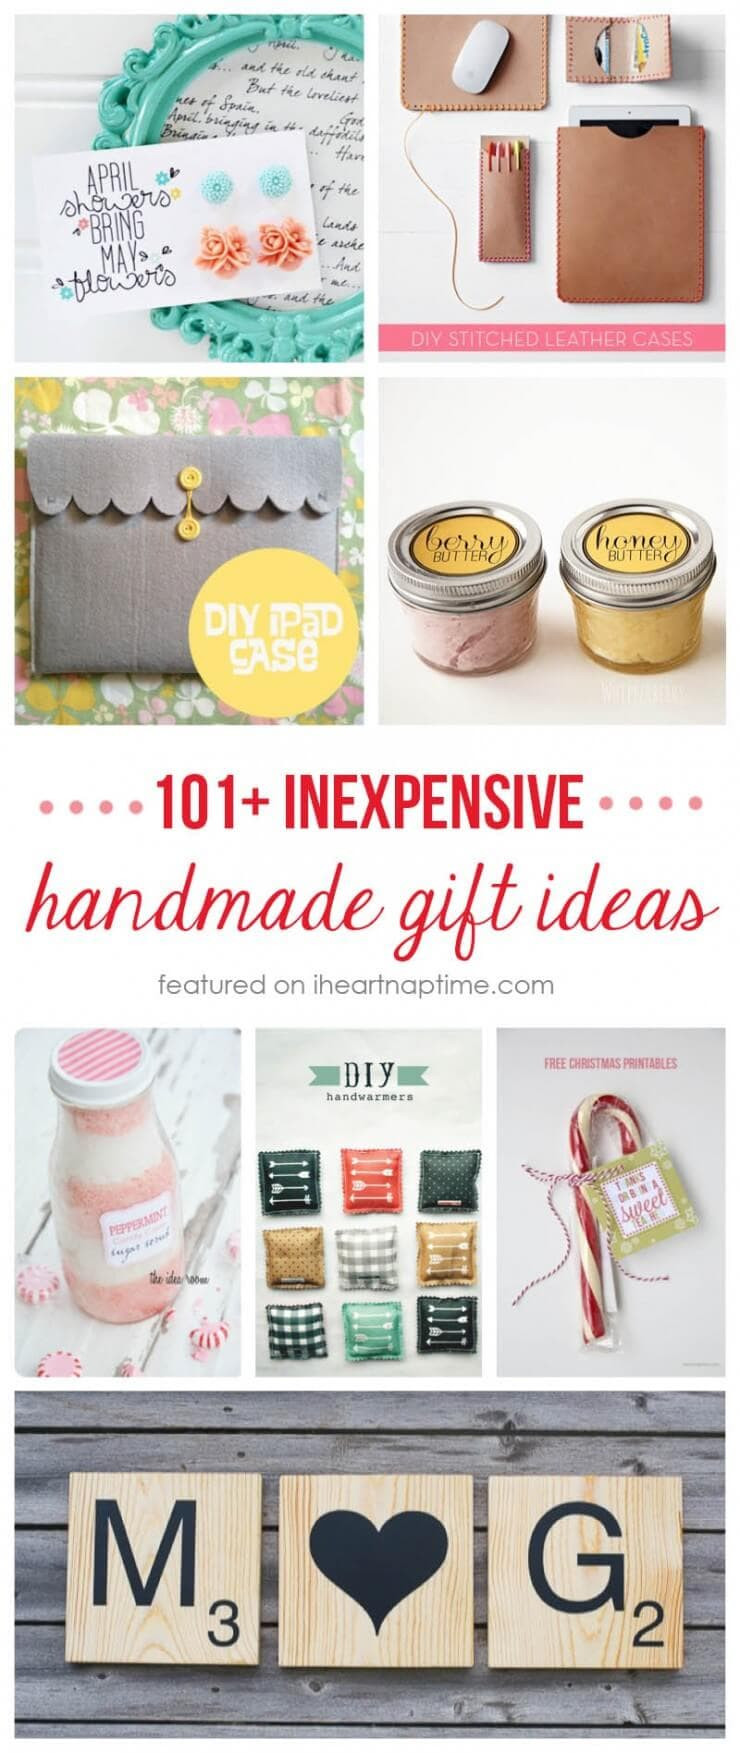 Christmas Gift DIY
 50 homemade t ideas to make for under $5 I Heart Nap Time